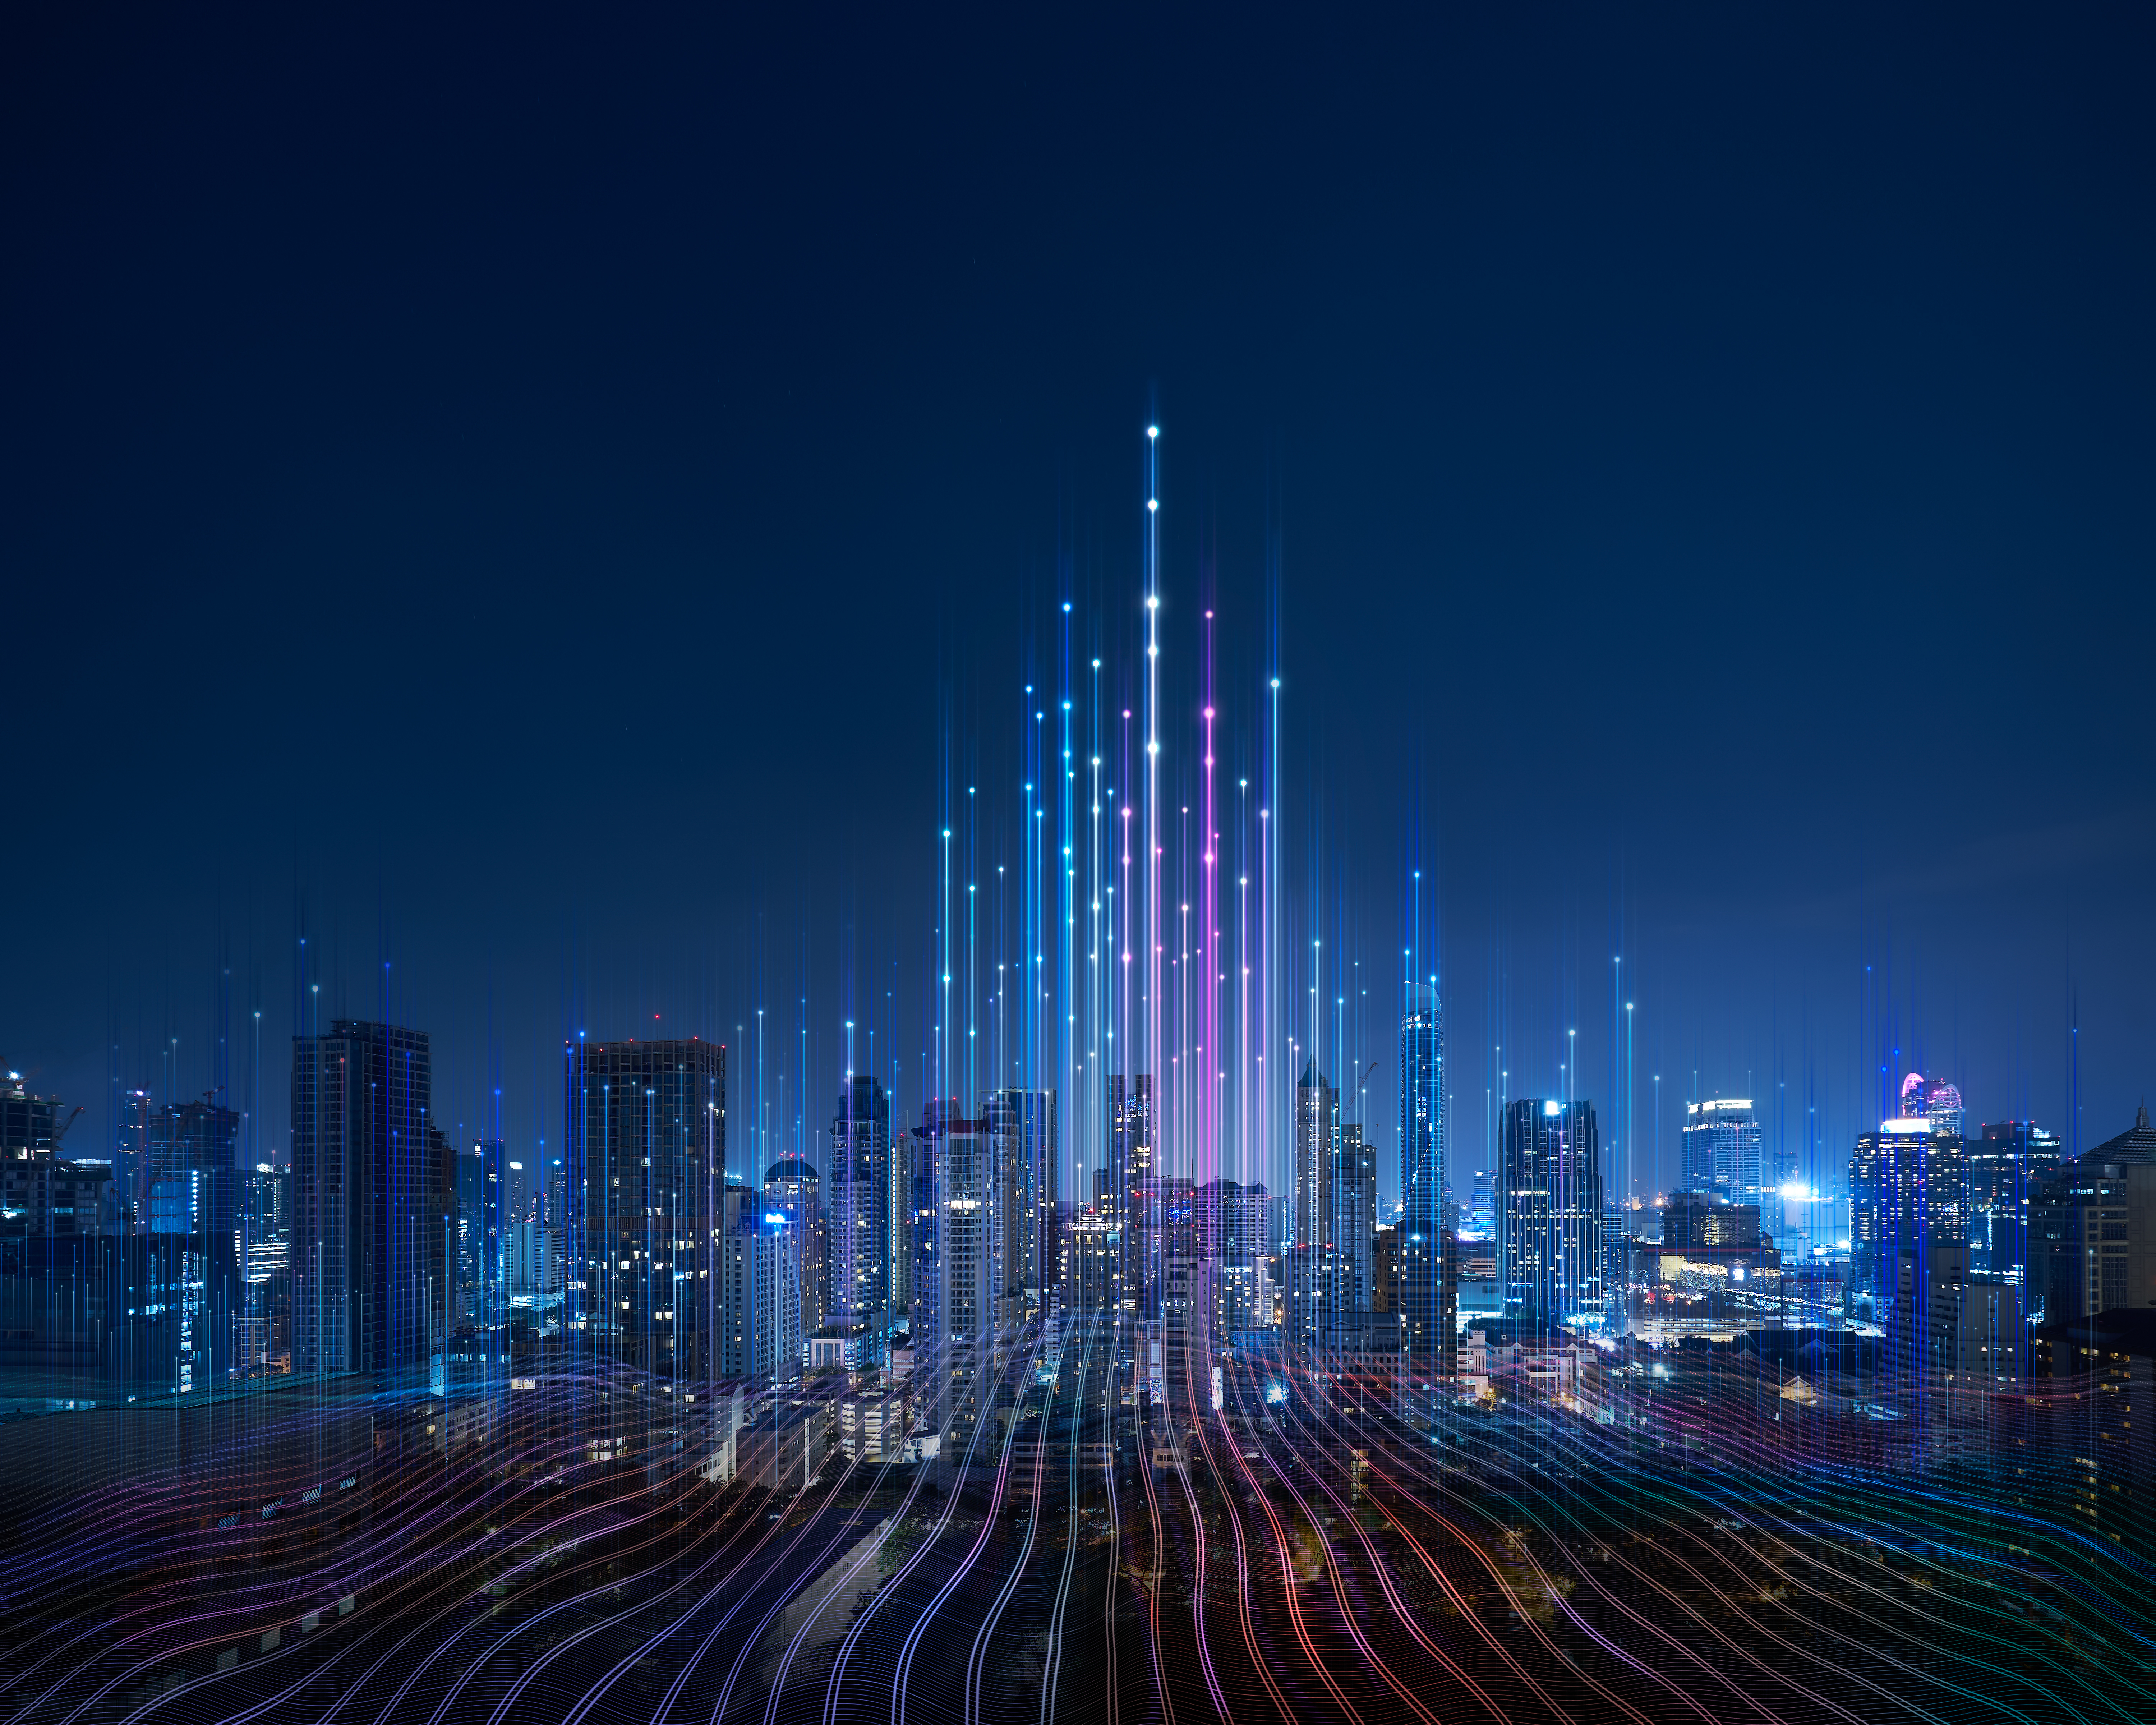 City landscape with digital imagery